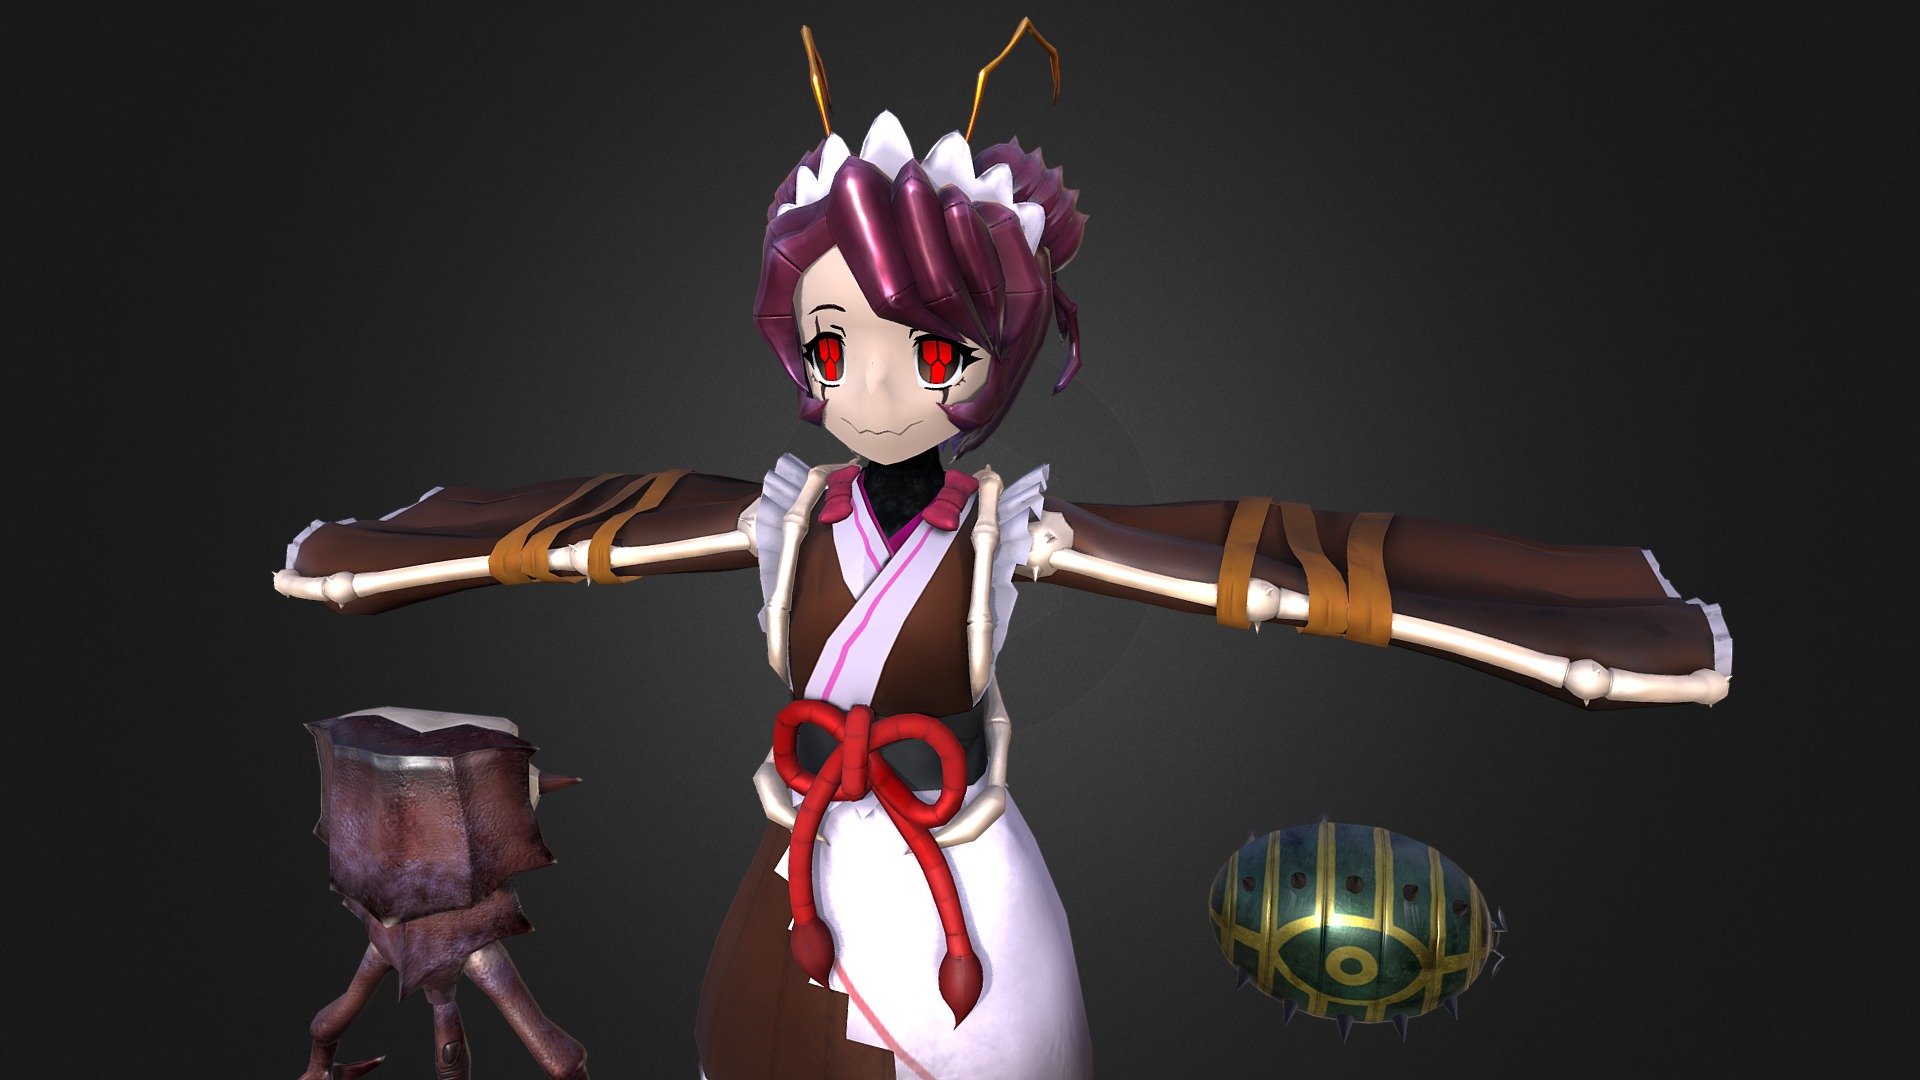 Entoma in a T-pose as requested.

Please don’t redistribute or modify the model. Model is only used for rendering/modeling/educational purposes.

Unit height: 149cm excluding antenna

9790 polys 19.3k tris - Entoma T-pose unrigged - Download Free 3D model by GHPurple 3d model